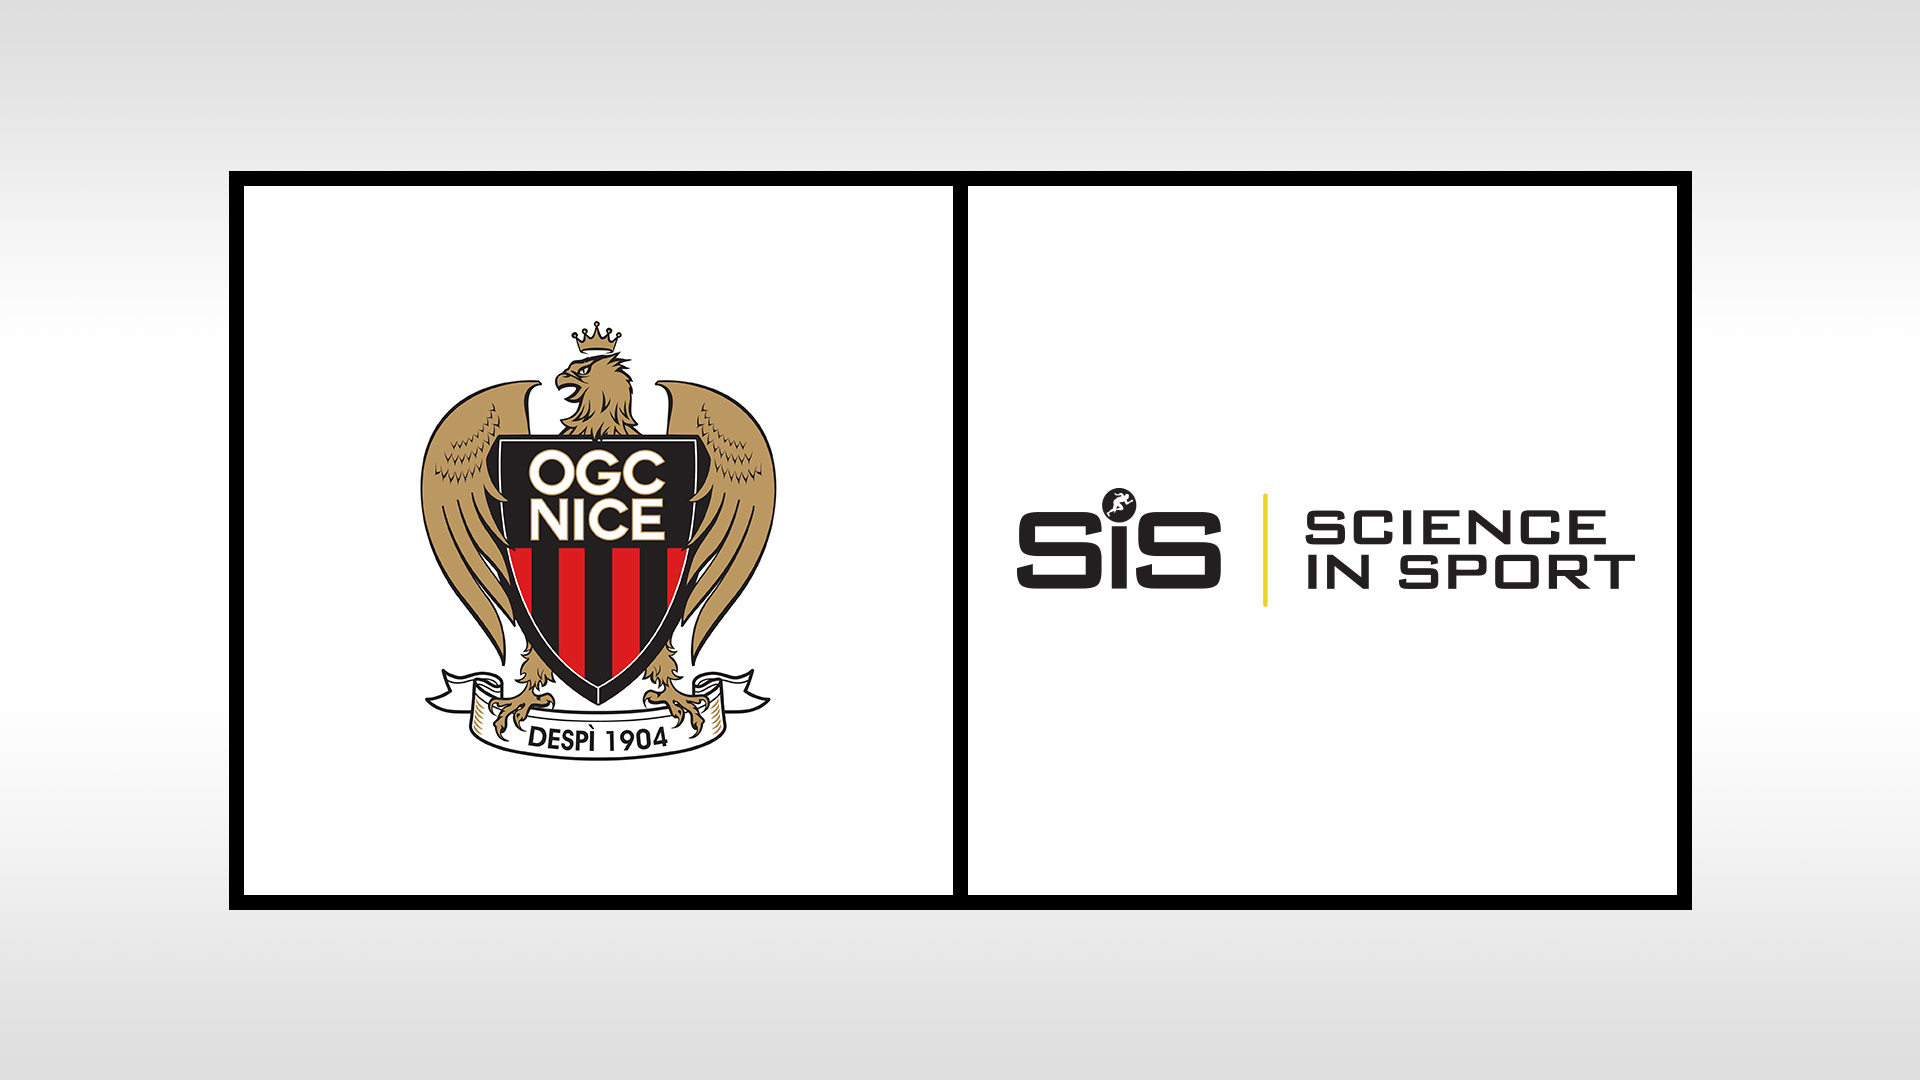 Science in Sport (SiS) is a new partner of OGC Nice